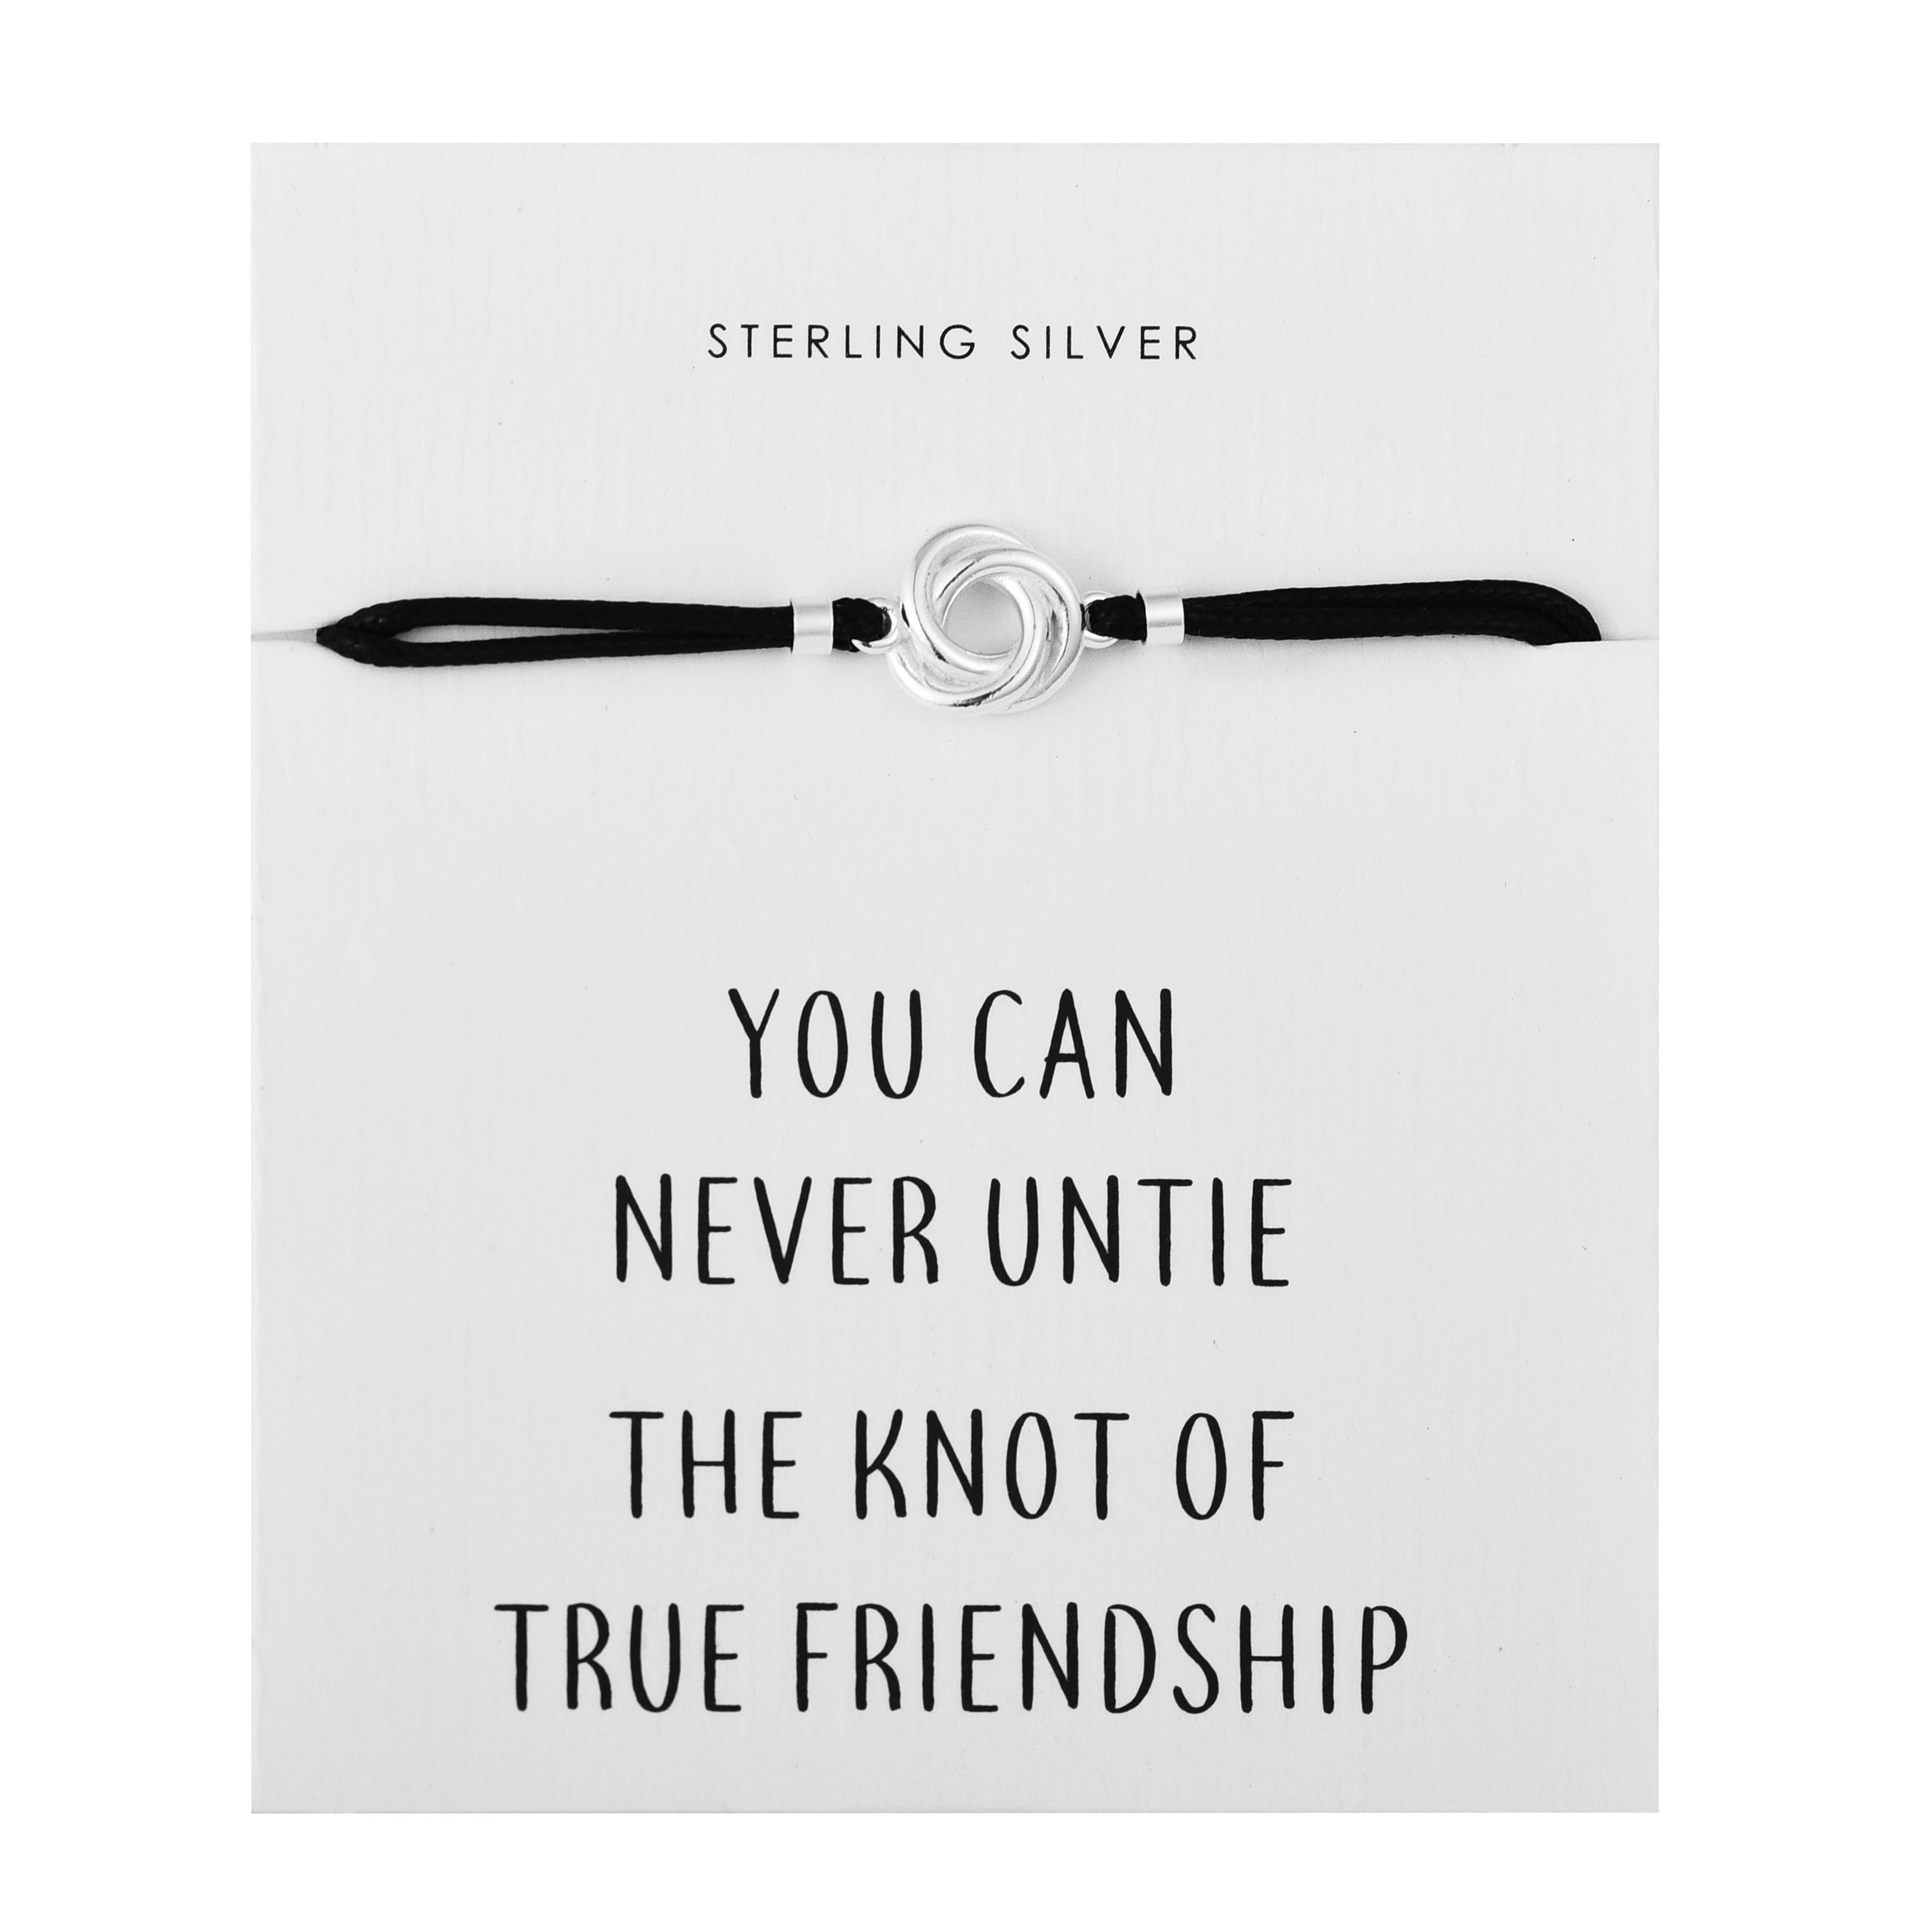 Sterling Silver Knot Quote Bracelet